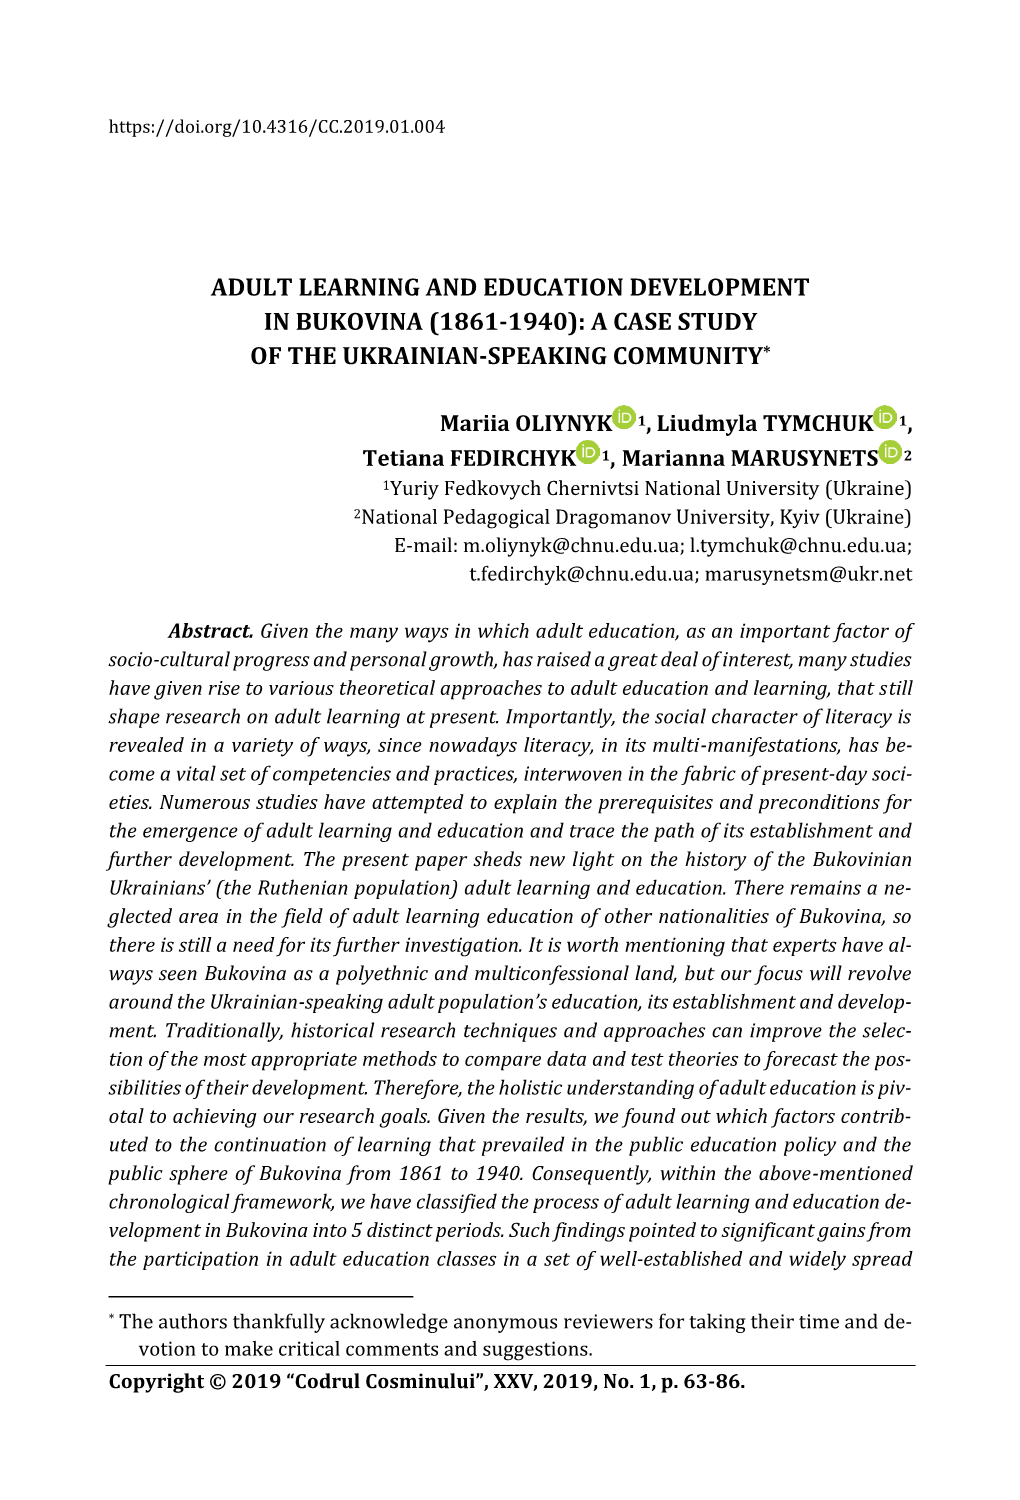 Adult Learning and Education Development in Bukovina (1861-1940): a Case Study of the Ukrainian-Speaking Community*